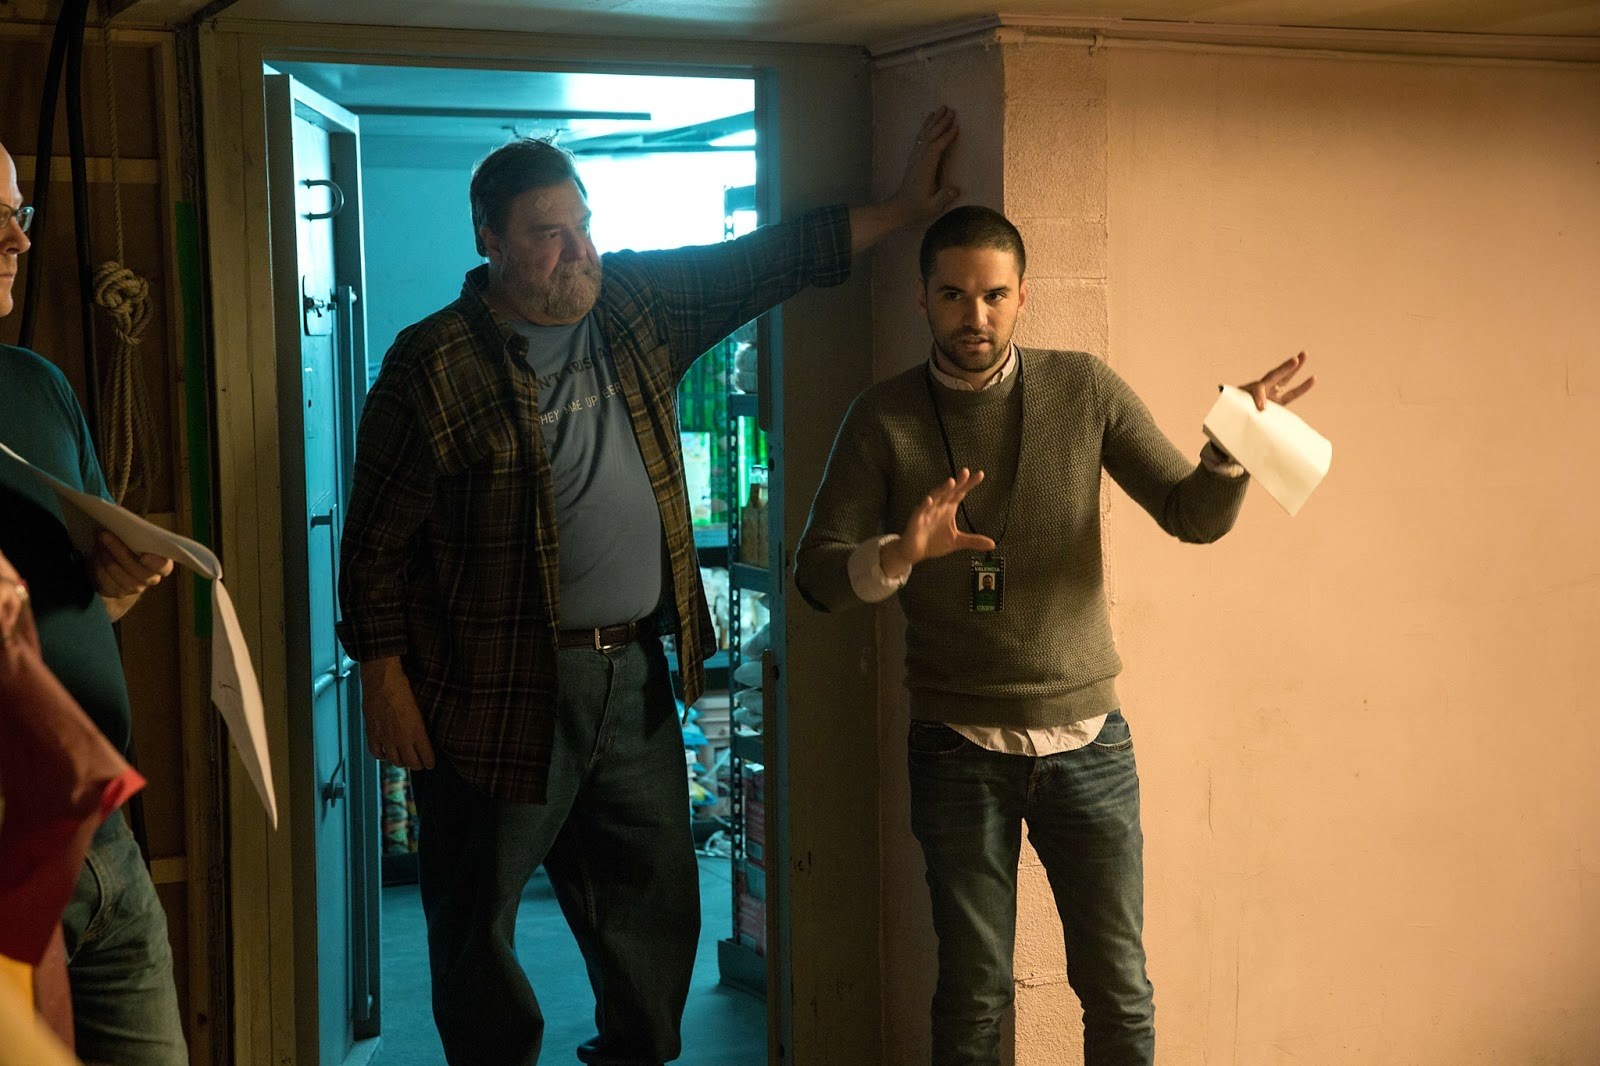 On Location : 10 Cloverfield Lane (2016) Behind the Scenes